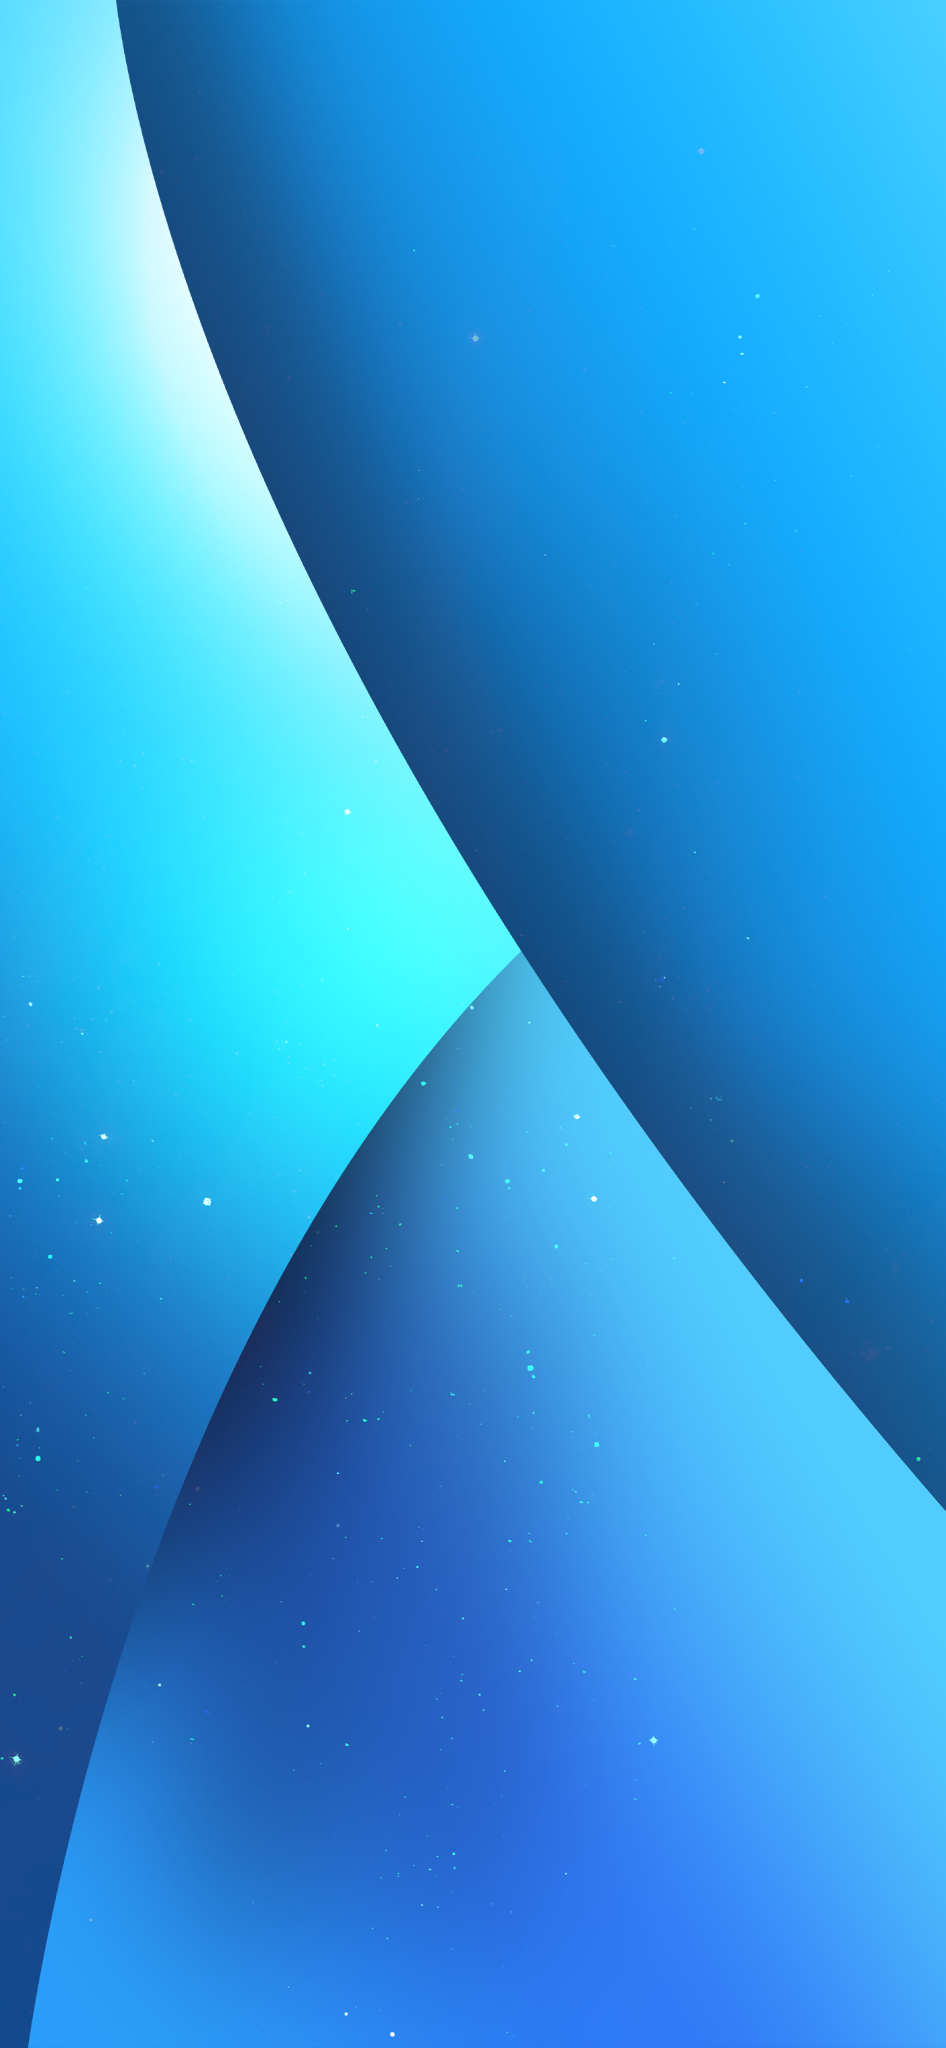 iOS 15.5 – Slice of Blue by Hk3ToN | Zollotech